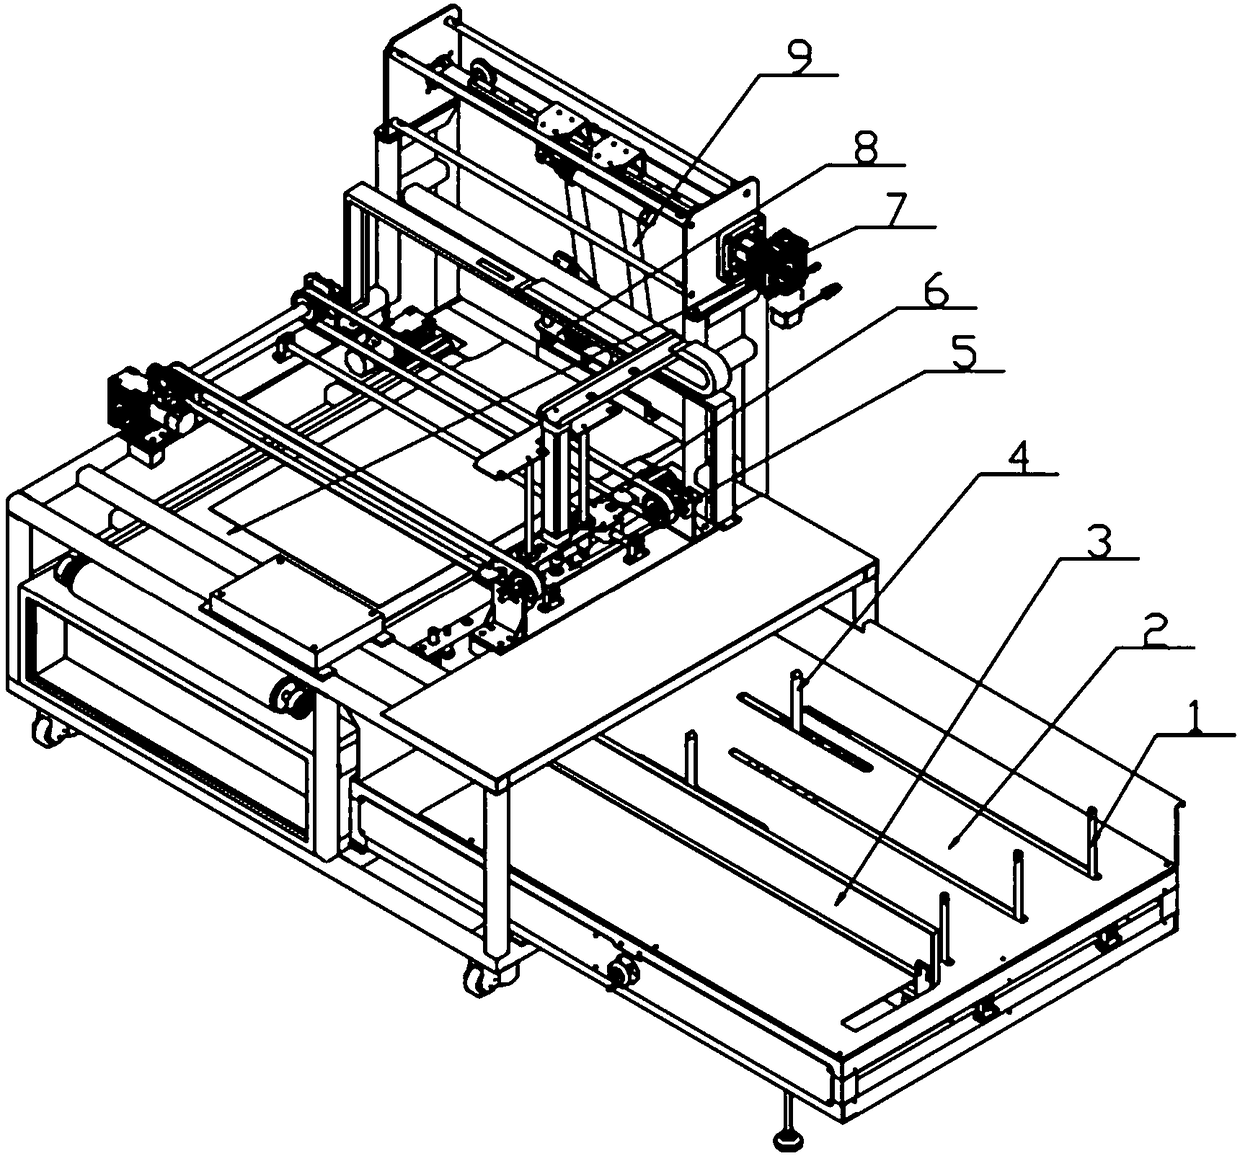 A fully automatic packaging equipment